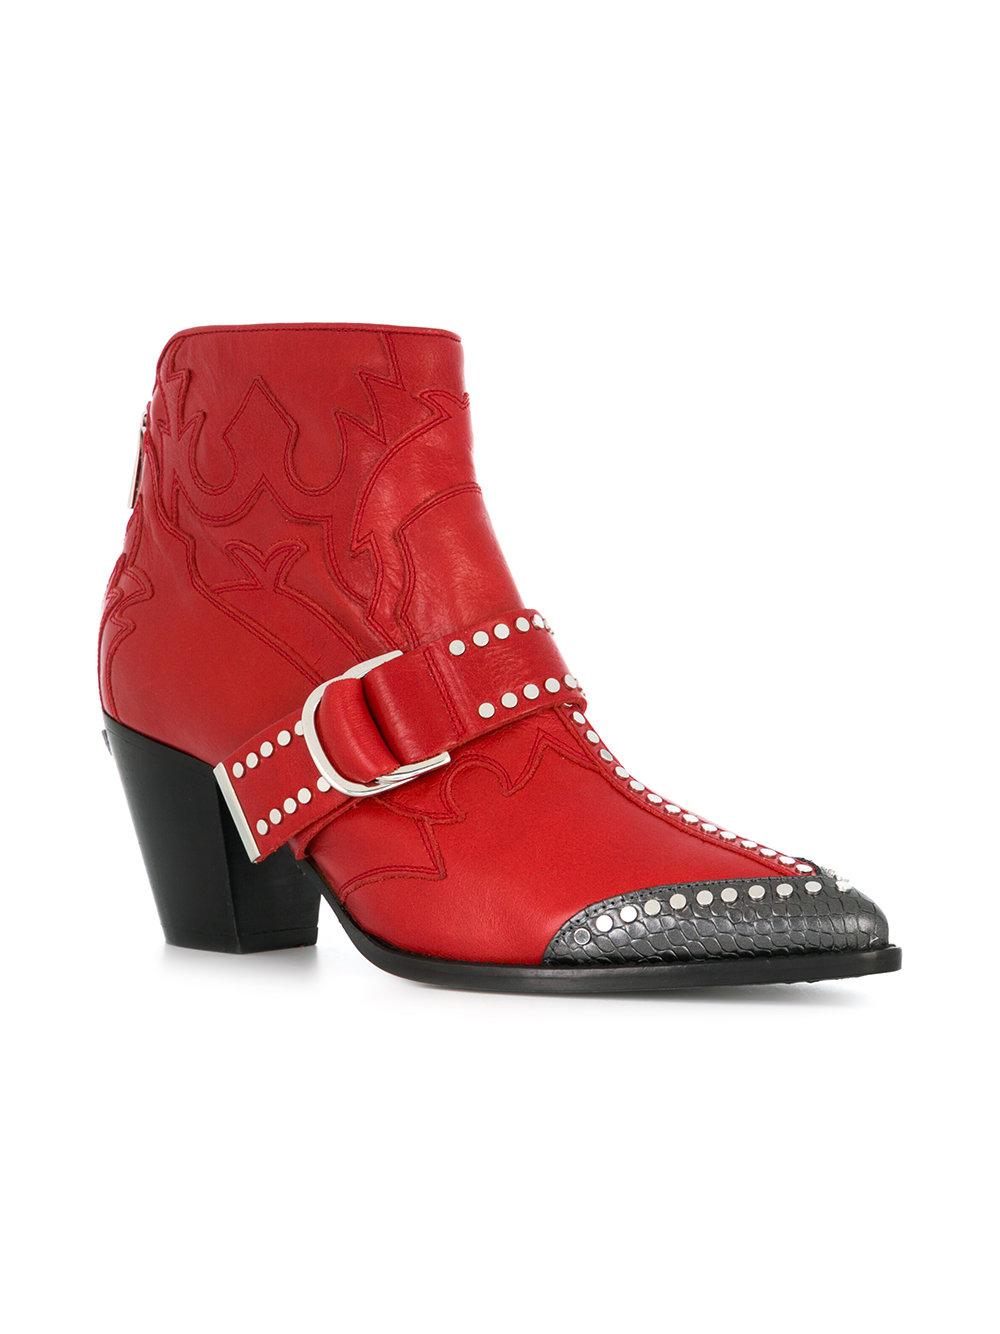 Zadig & Voltaire Cara Boots in Red | Lyst